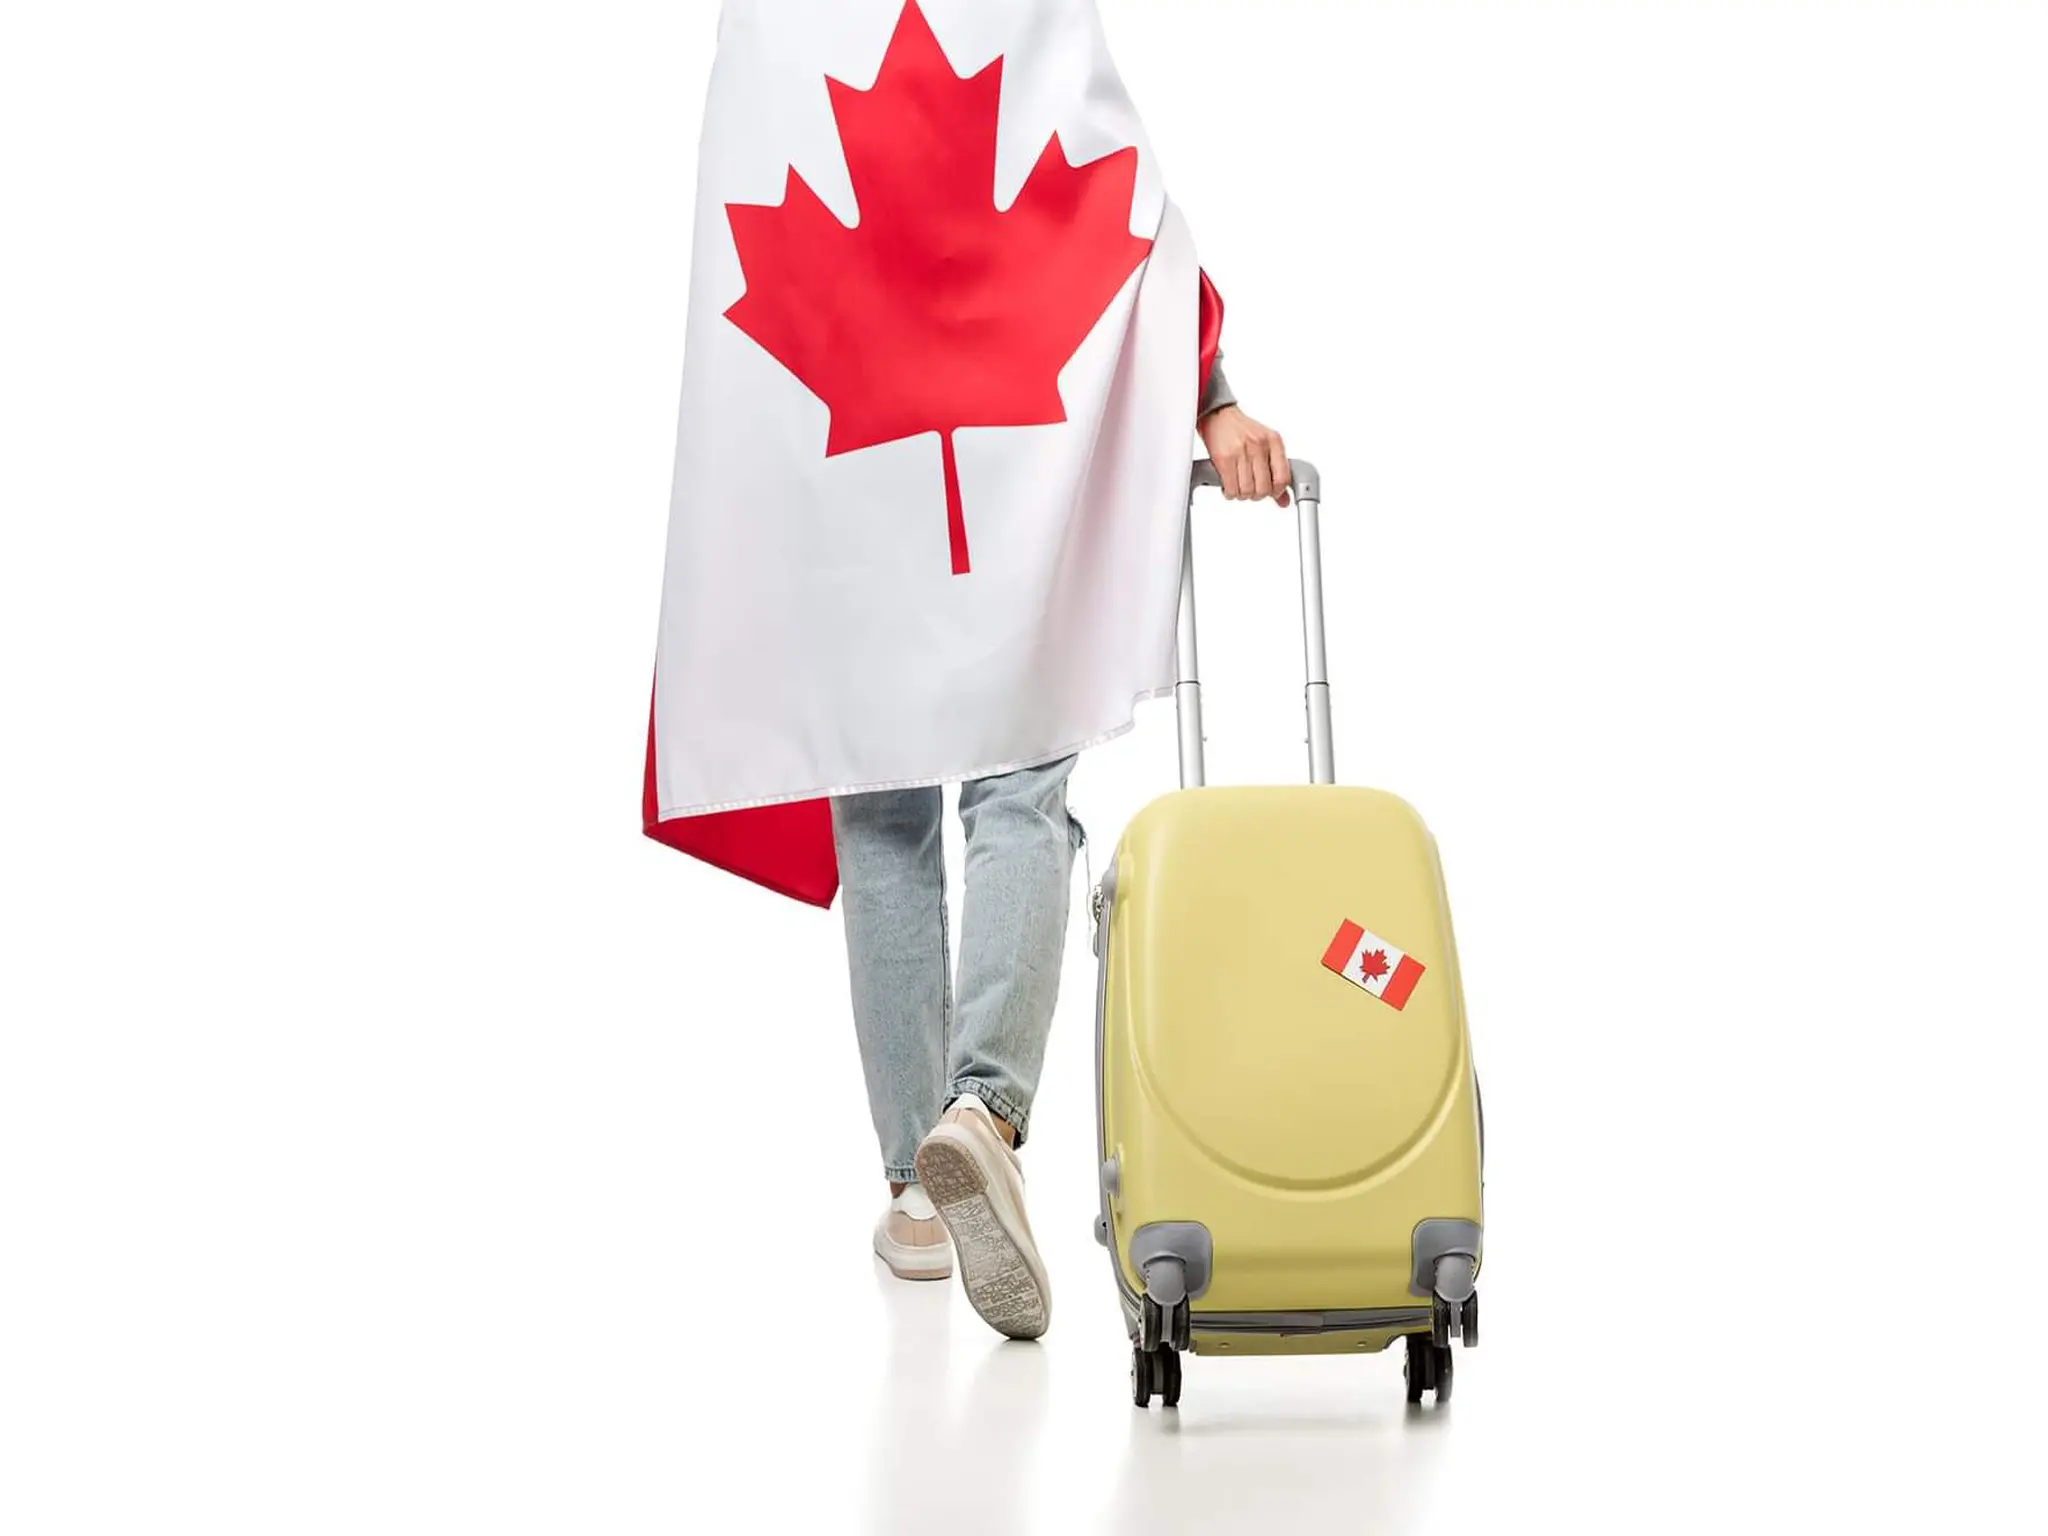 The most in-demand professions for those wishing to travel to Canada